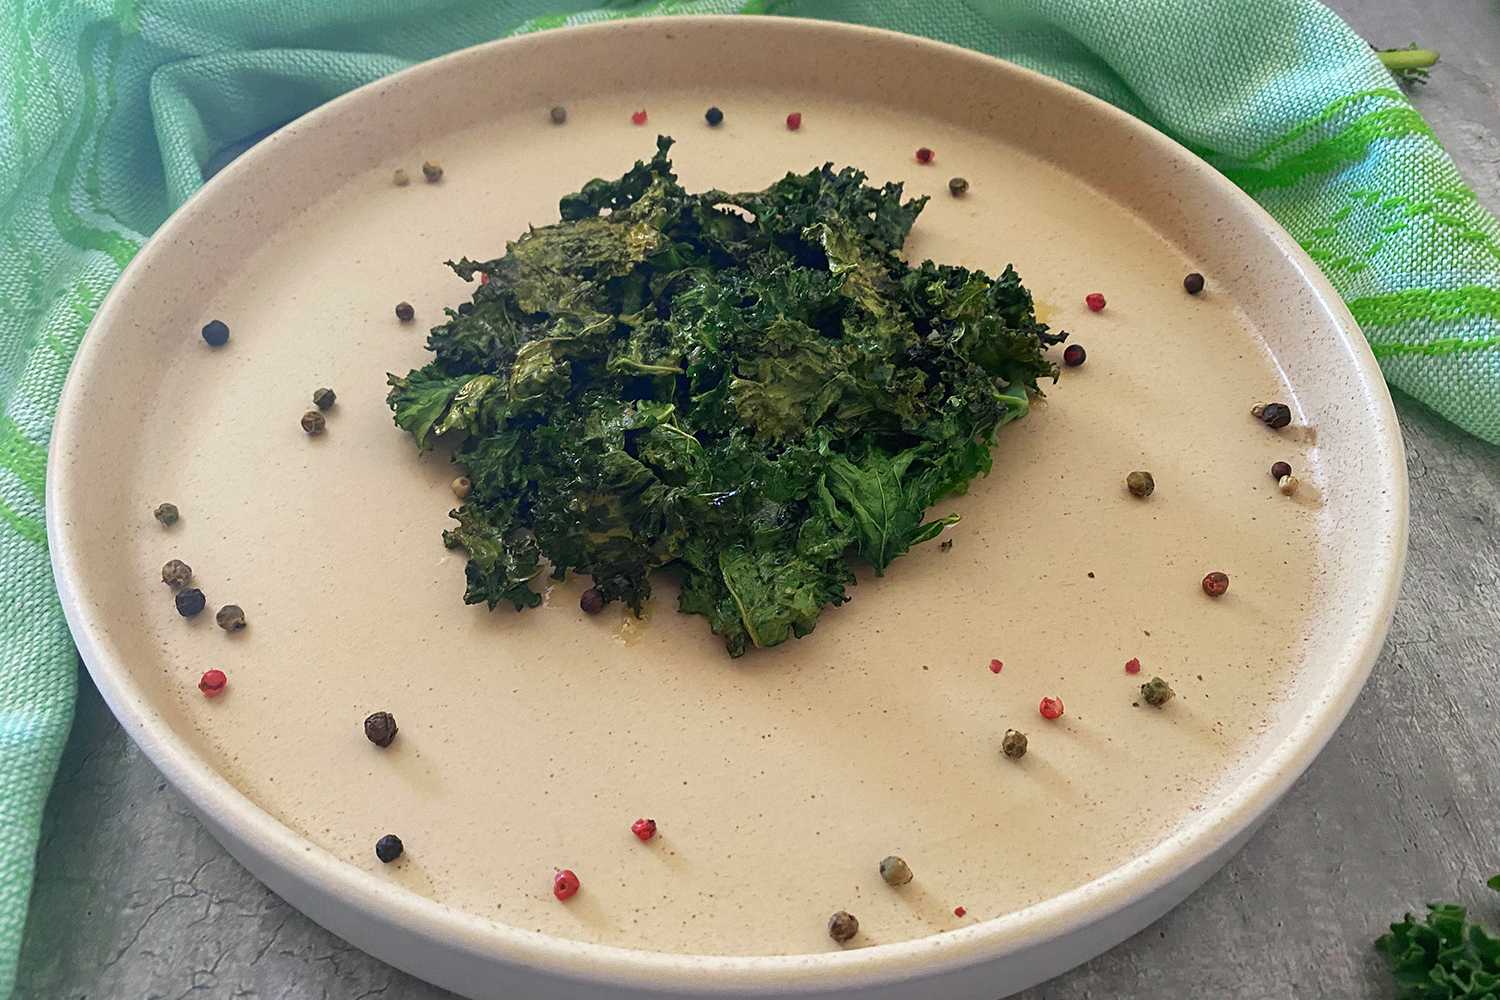 Kale chips in a white plate with Allspice around the plate